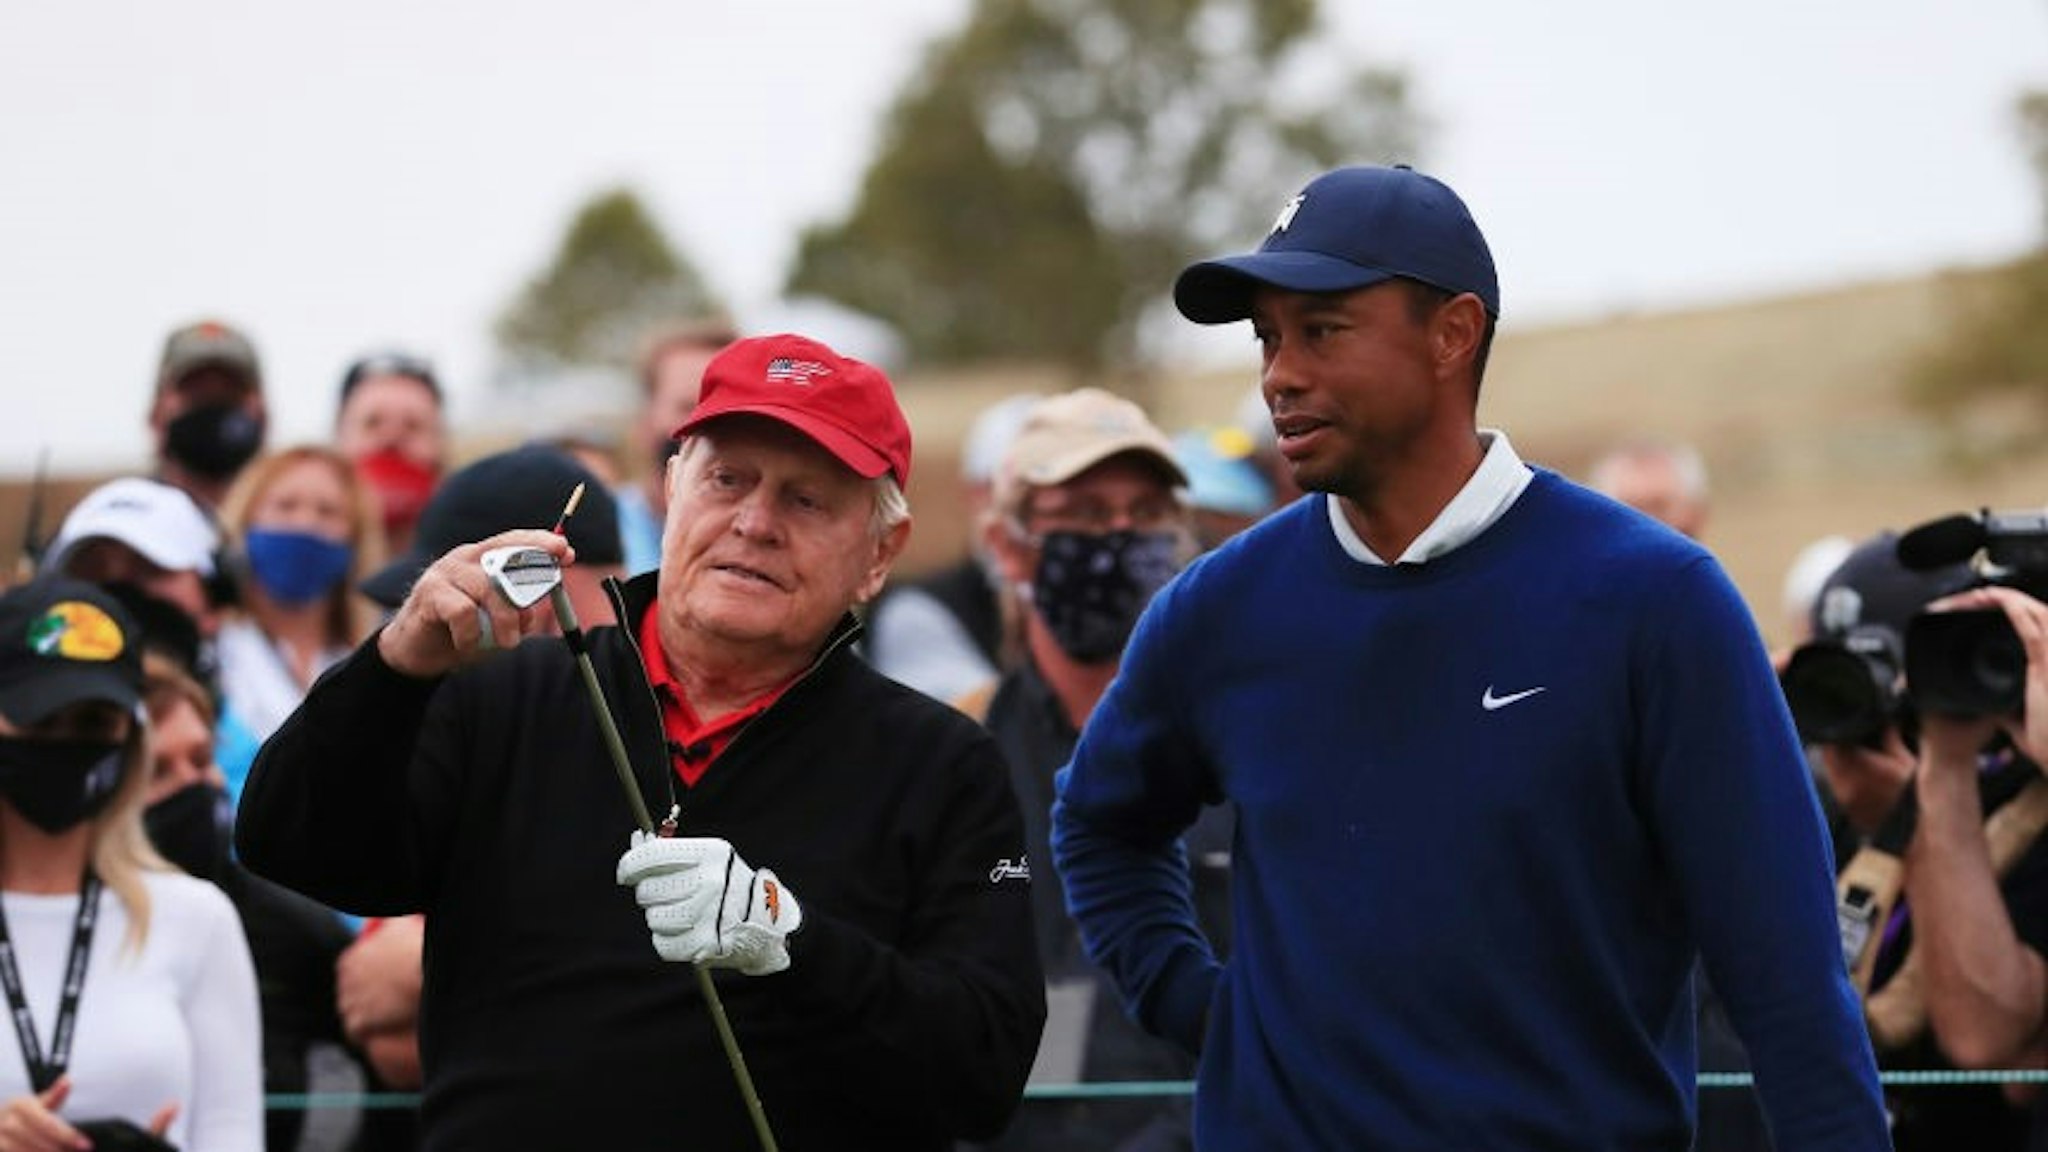 RIDGEDALE, MISSOURI - SEPTEMBER 22: Jack Nicklaus talks to Tiger Woods of the United States on the 19th tee during the Payne’s Valley Cup on September 22, 2020 on the Payne’s Valley course at Big Cedar Lodge in Ridgedale, Missouri. (Photo by